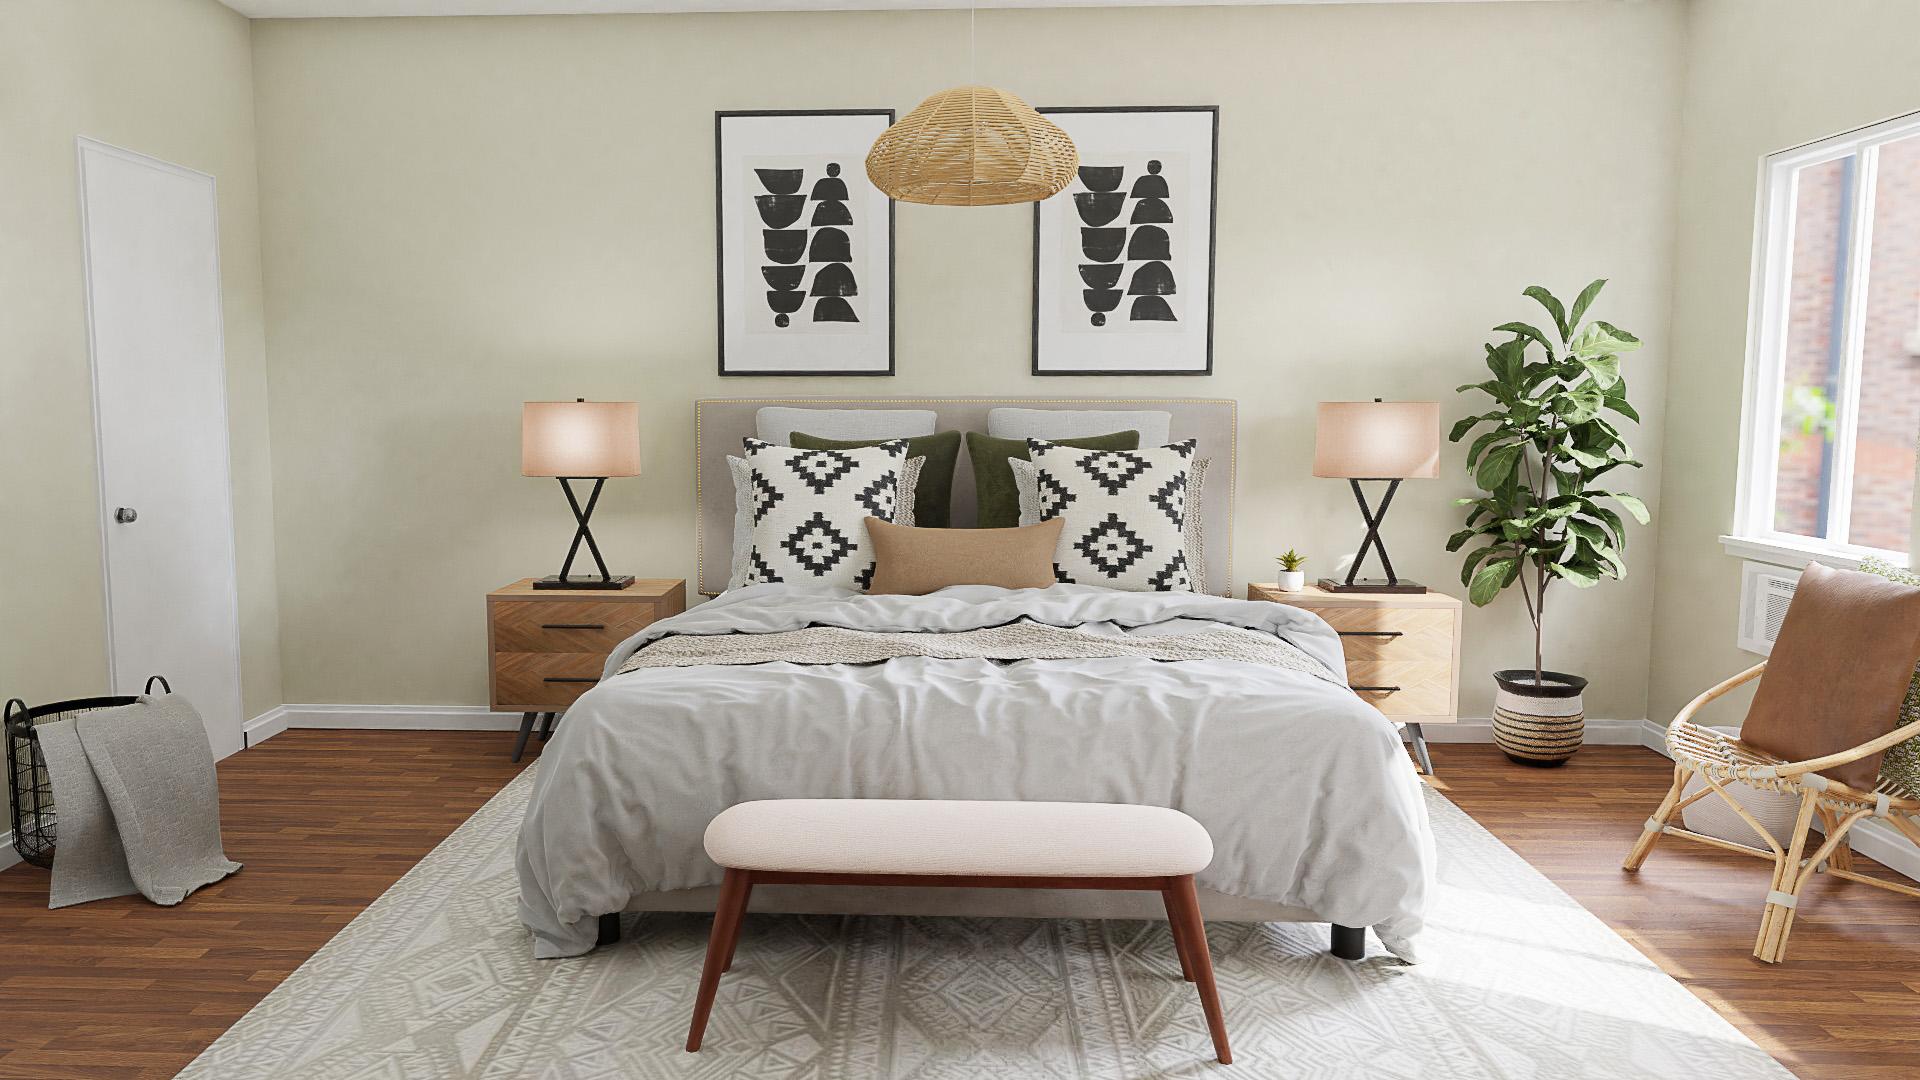 It’s Monochrome Madness In This Mid-century Modern Bedroom